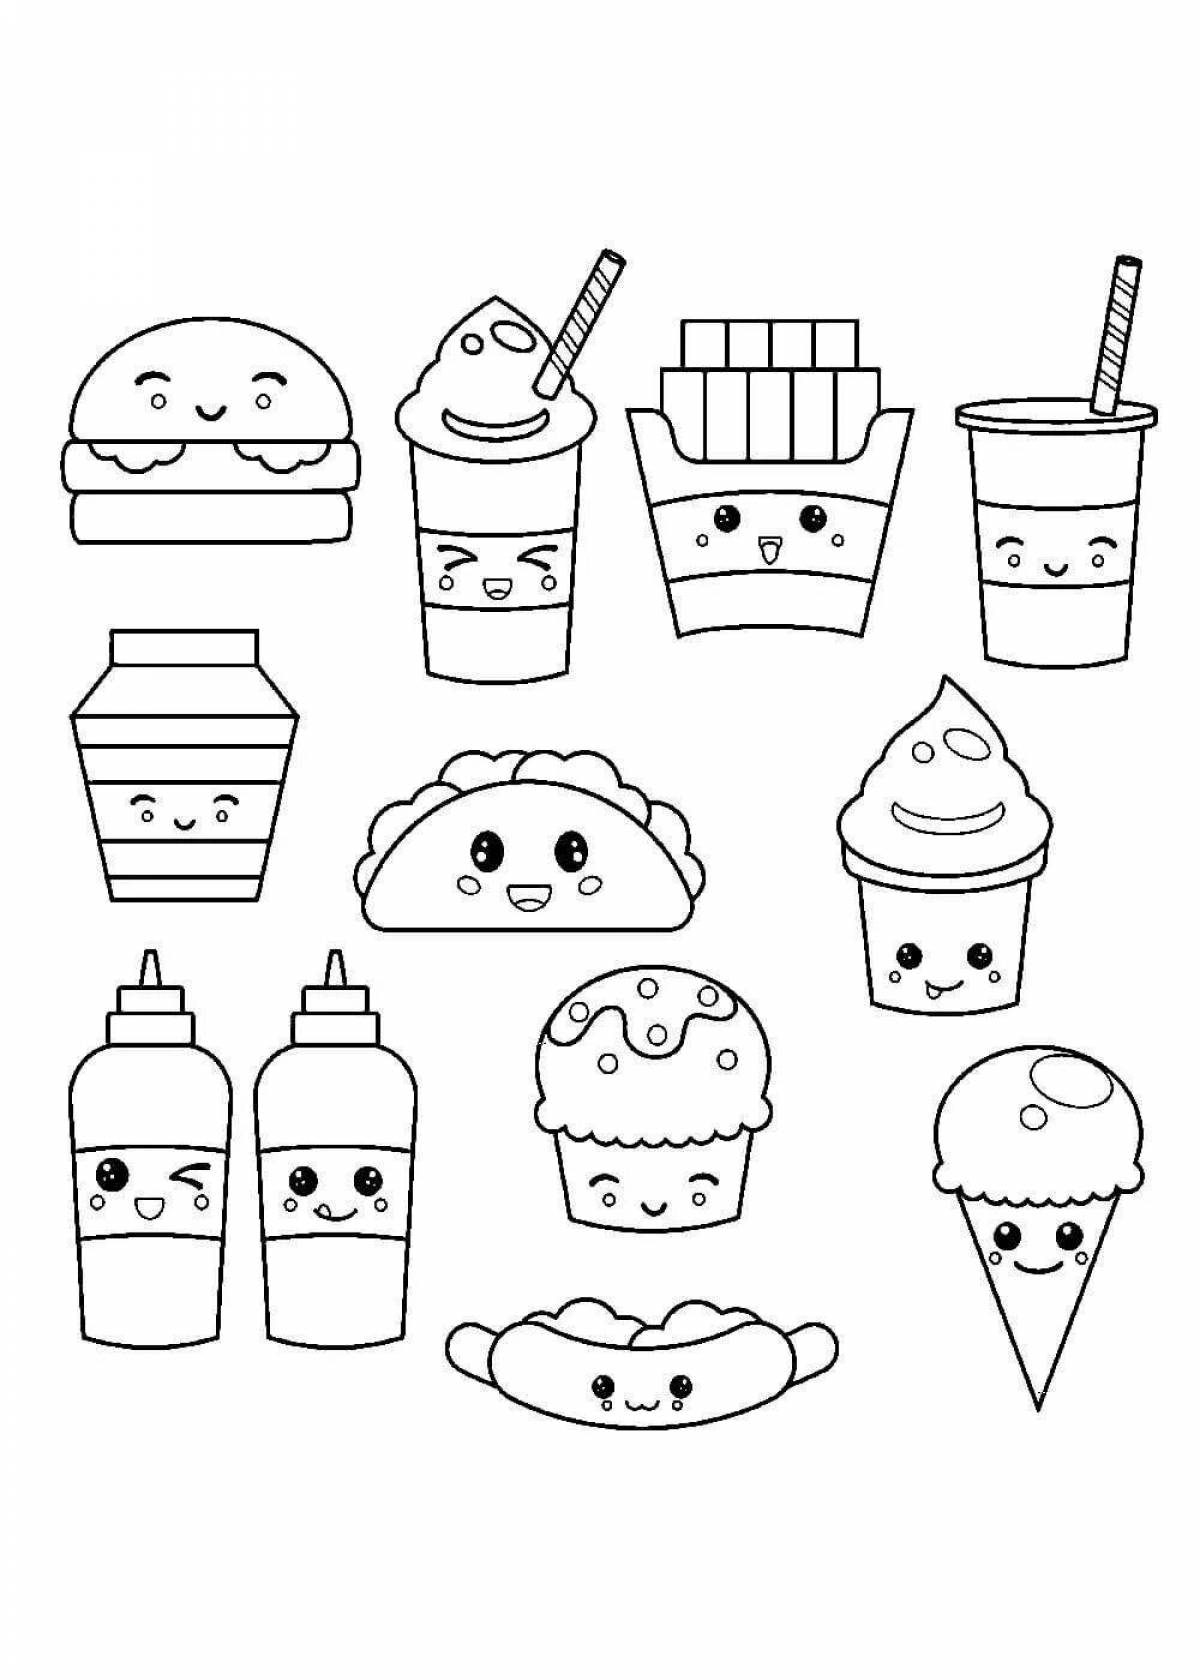 Fabulous coloring pages for stickers